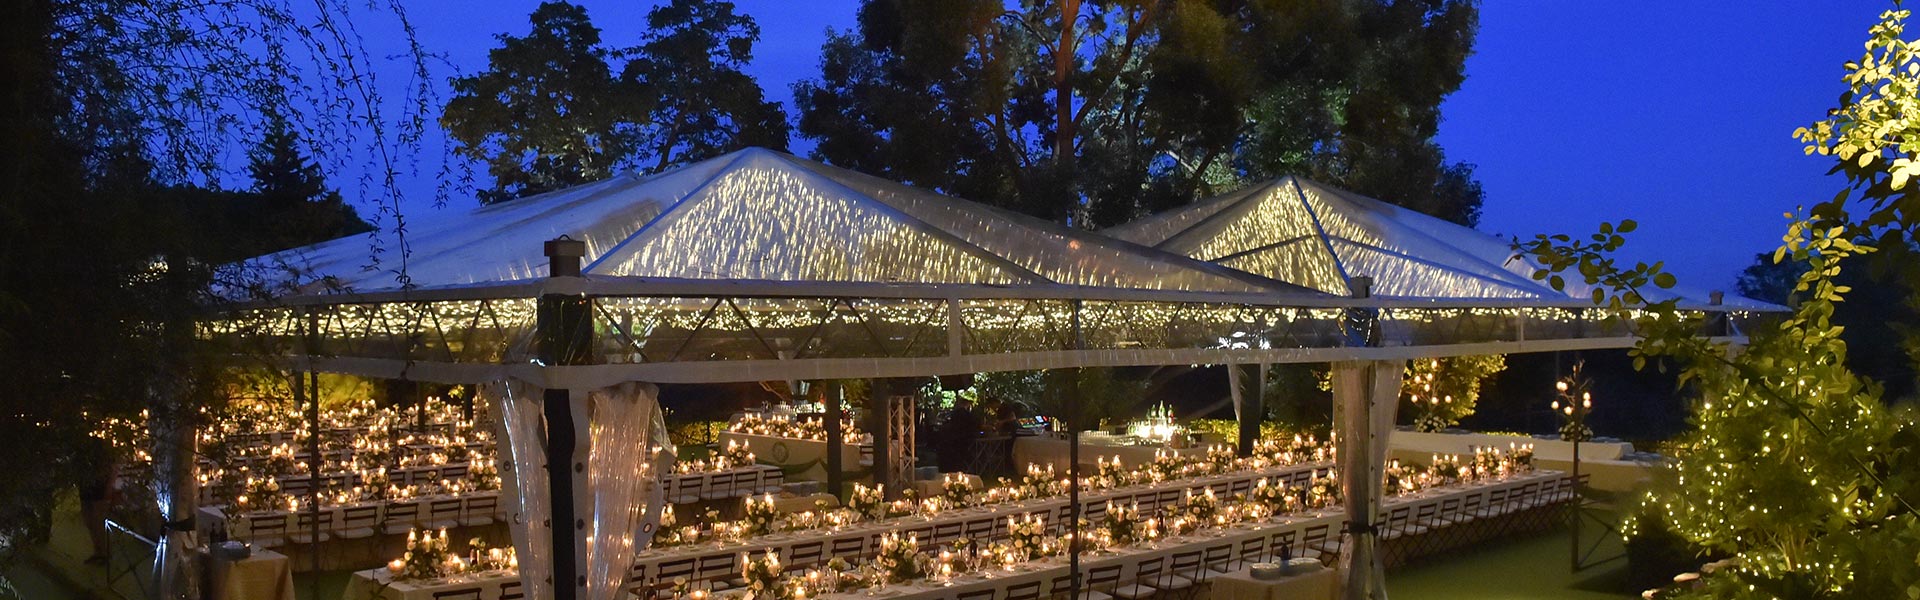 Crystal marquees for evening outdoor wedding in the luxurious garden of a private villa along the via Appia Antica in Rome